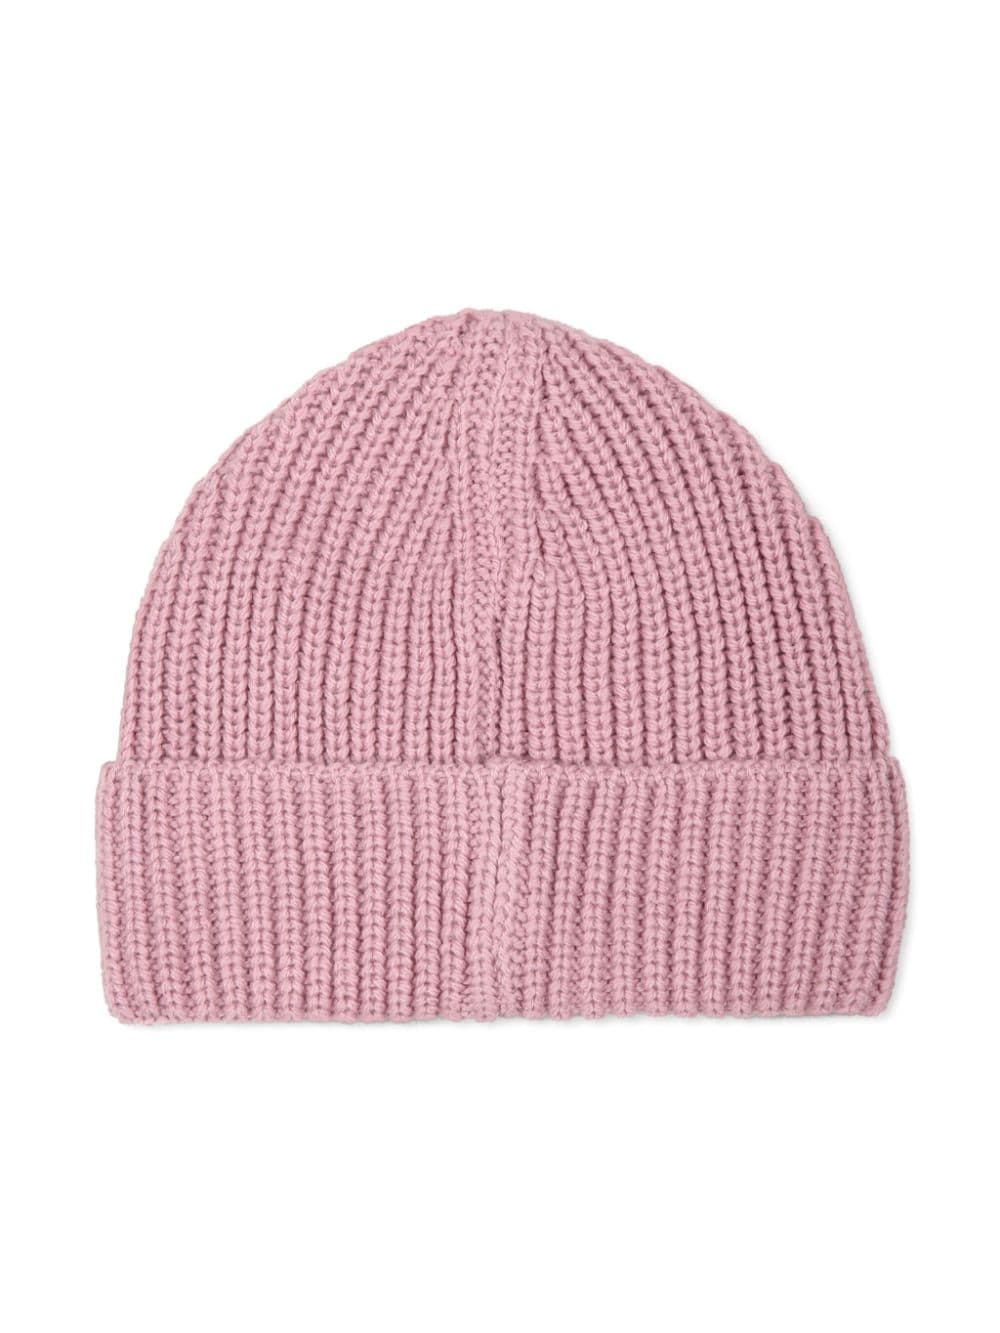 Hat for girls in pink wool blend